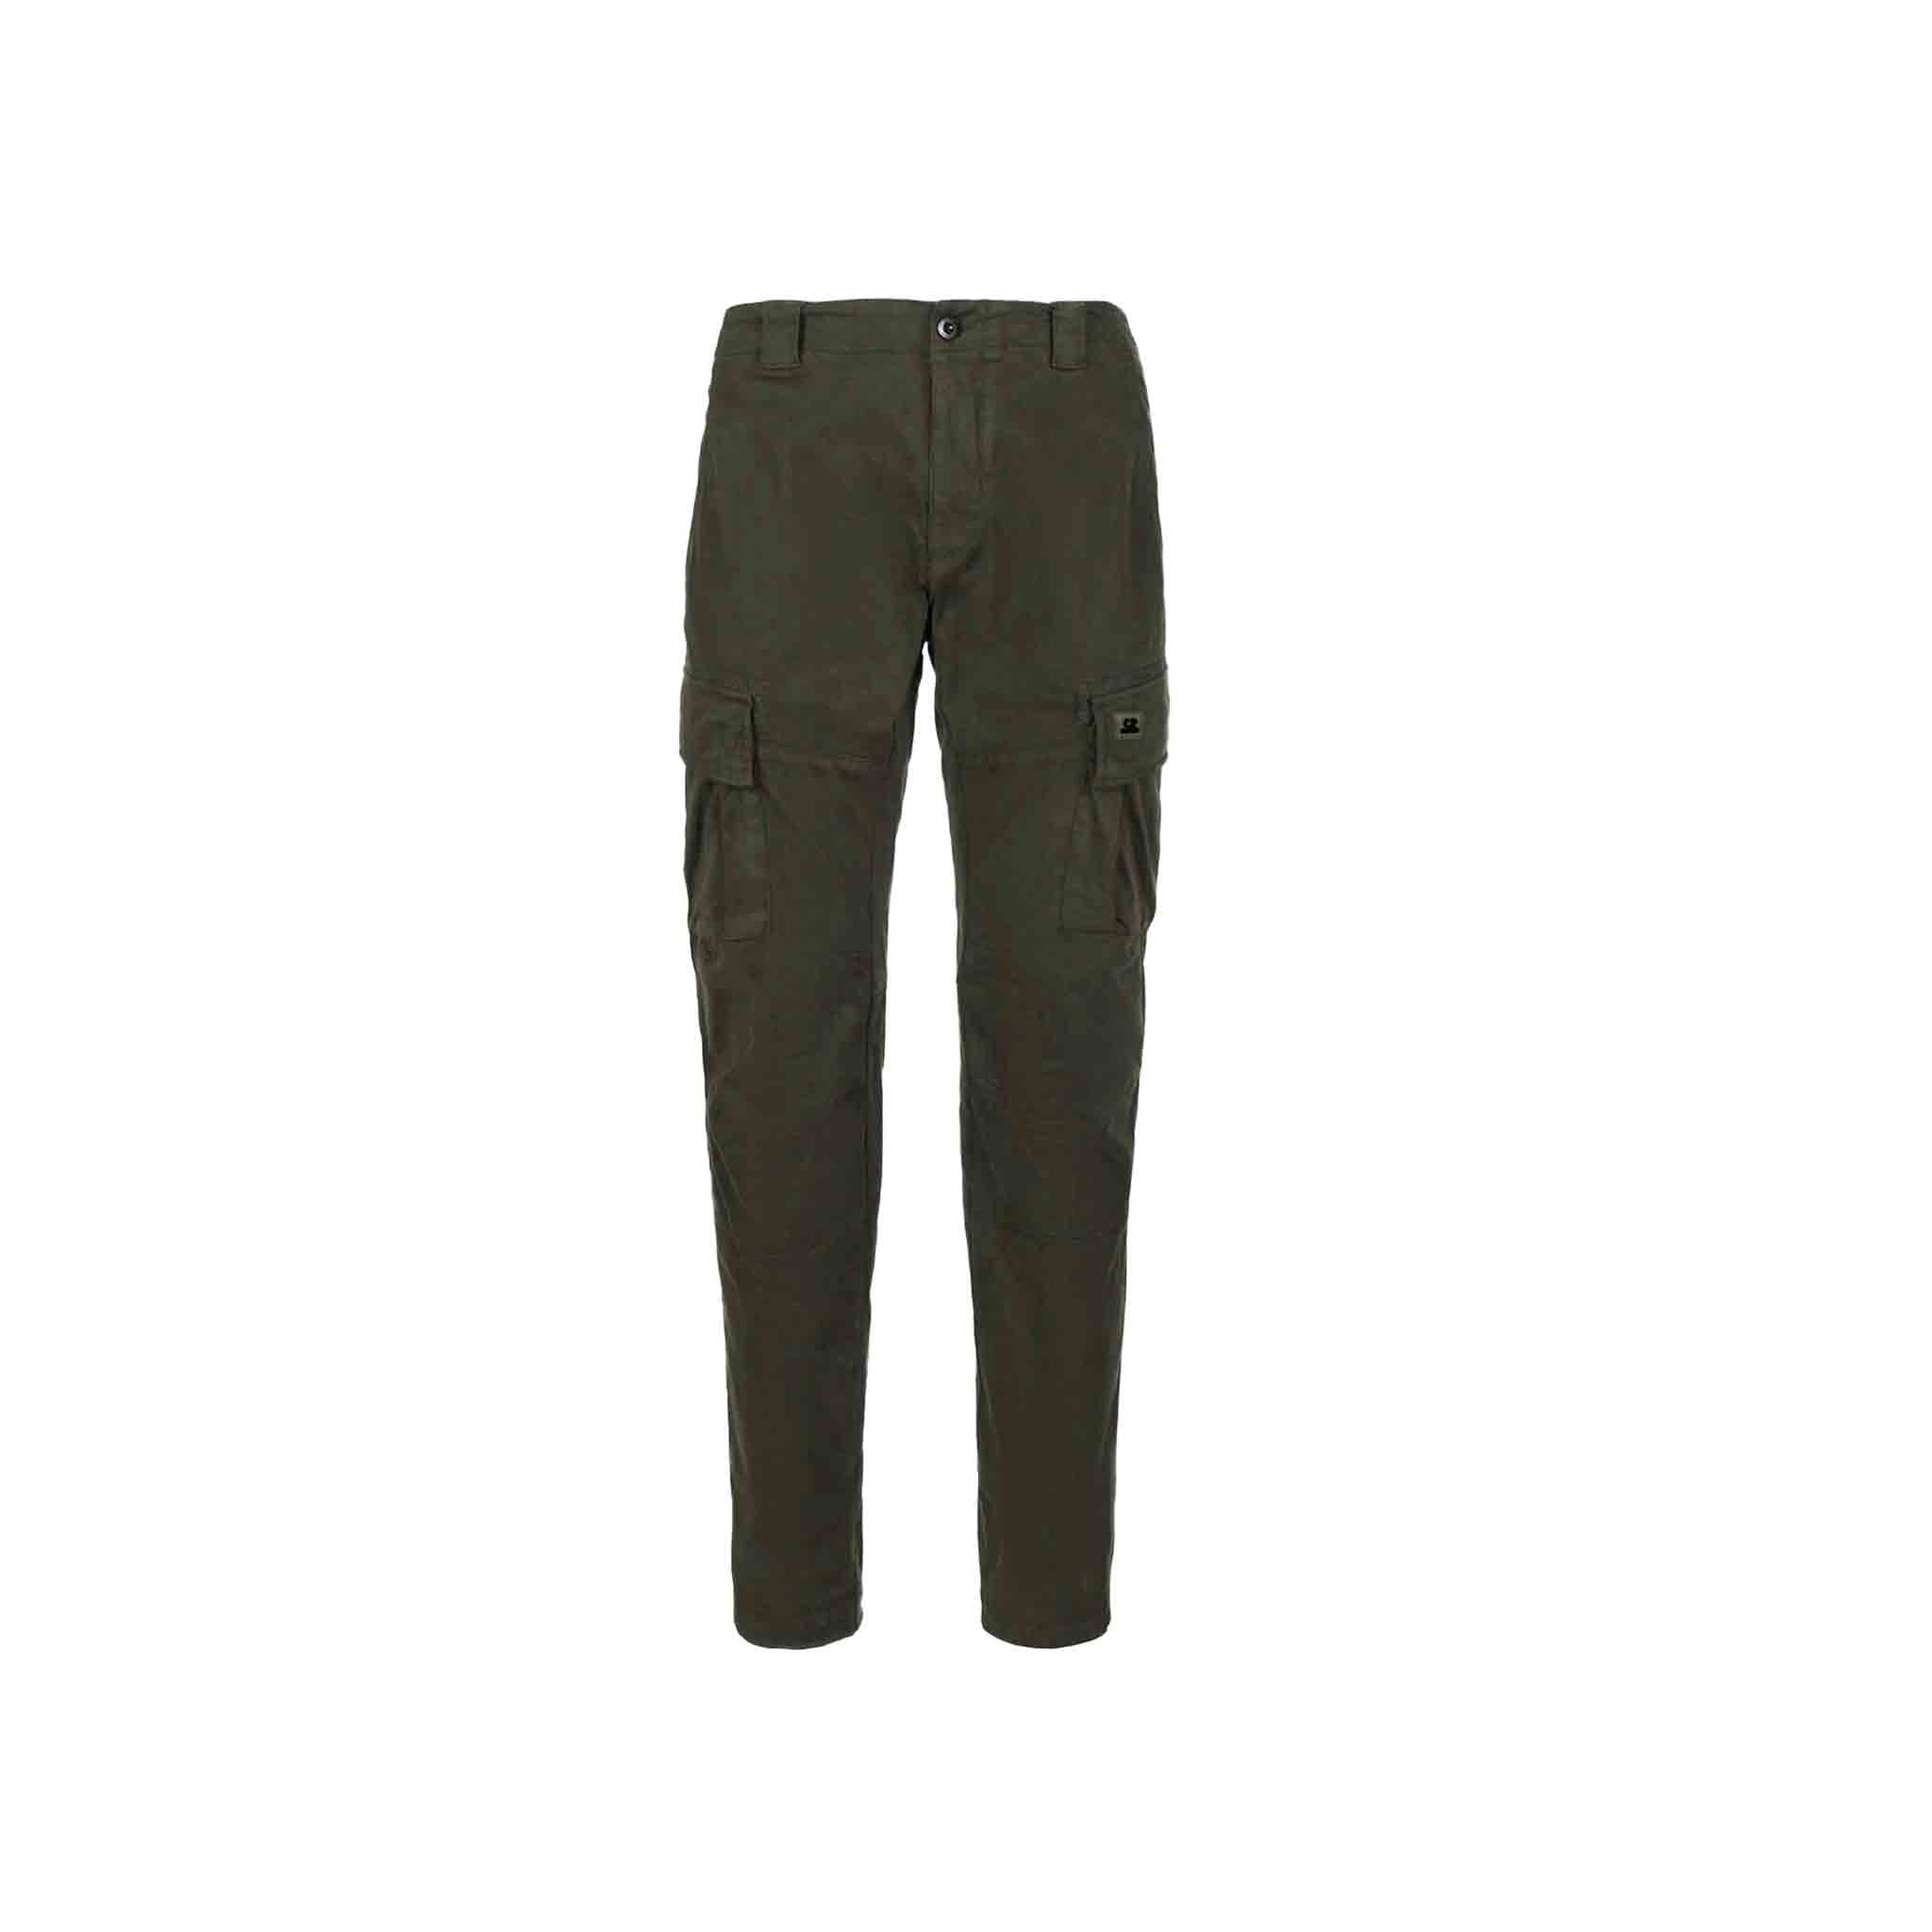 C.P Company Sateen Stretch Cargo Pants Ergonomic Fit in Ivy Green